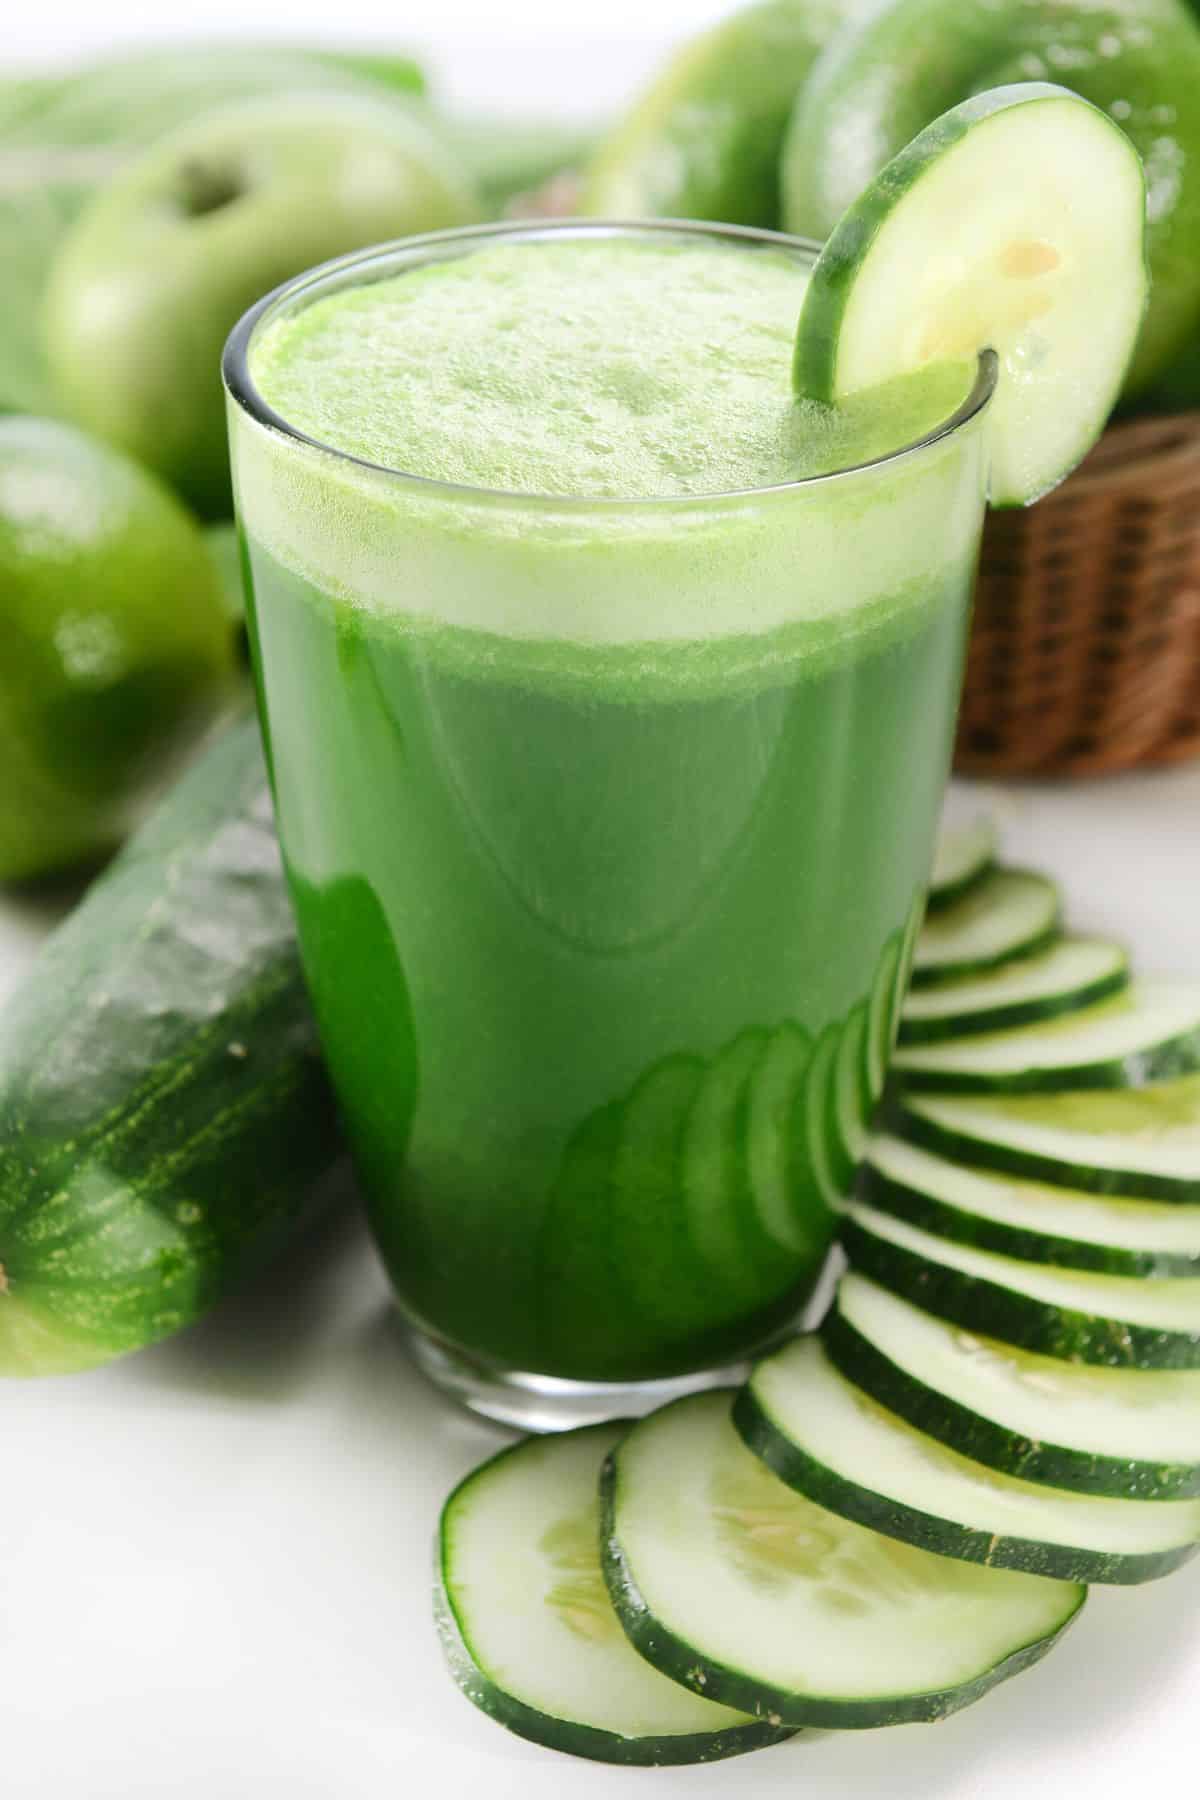 A short glass of green juice on the table with cucumber slices.